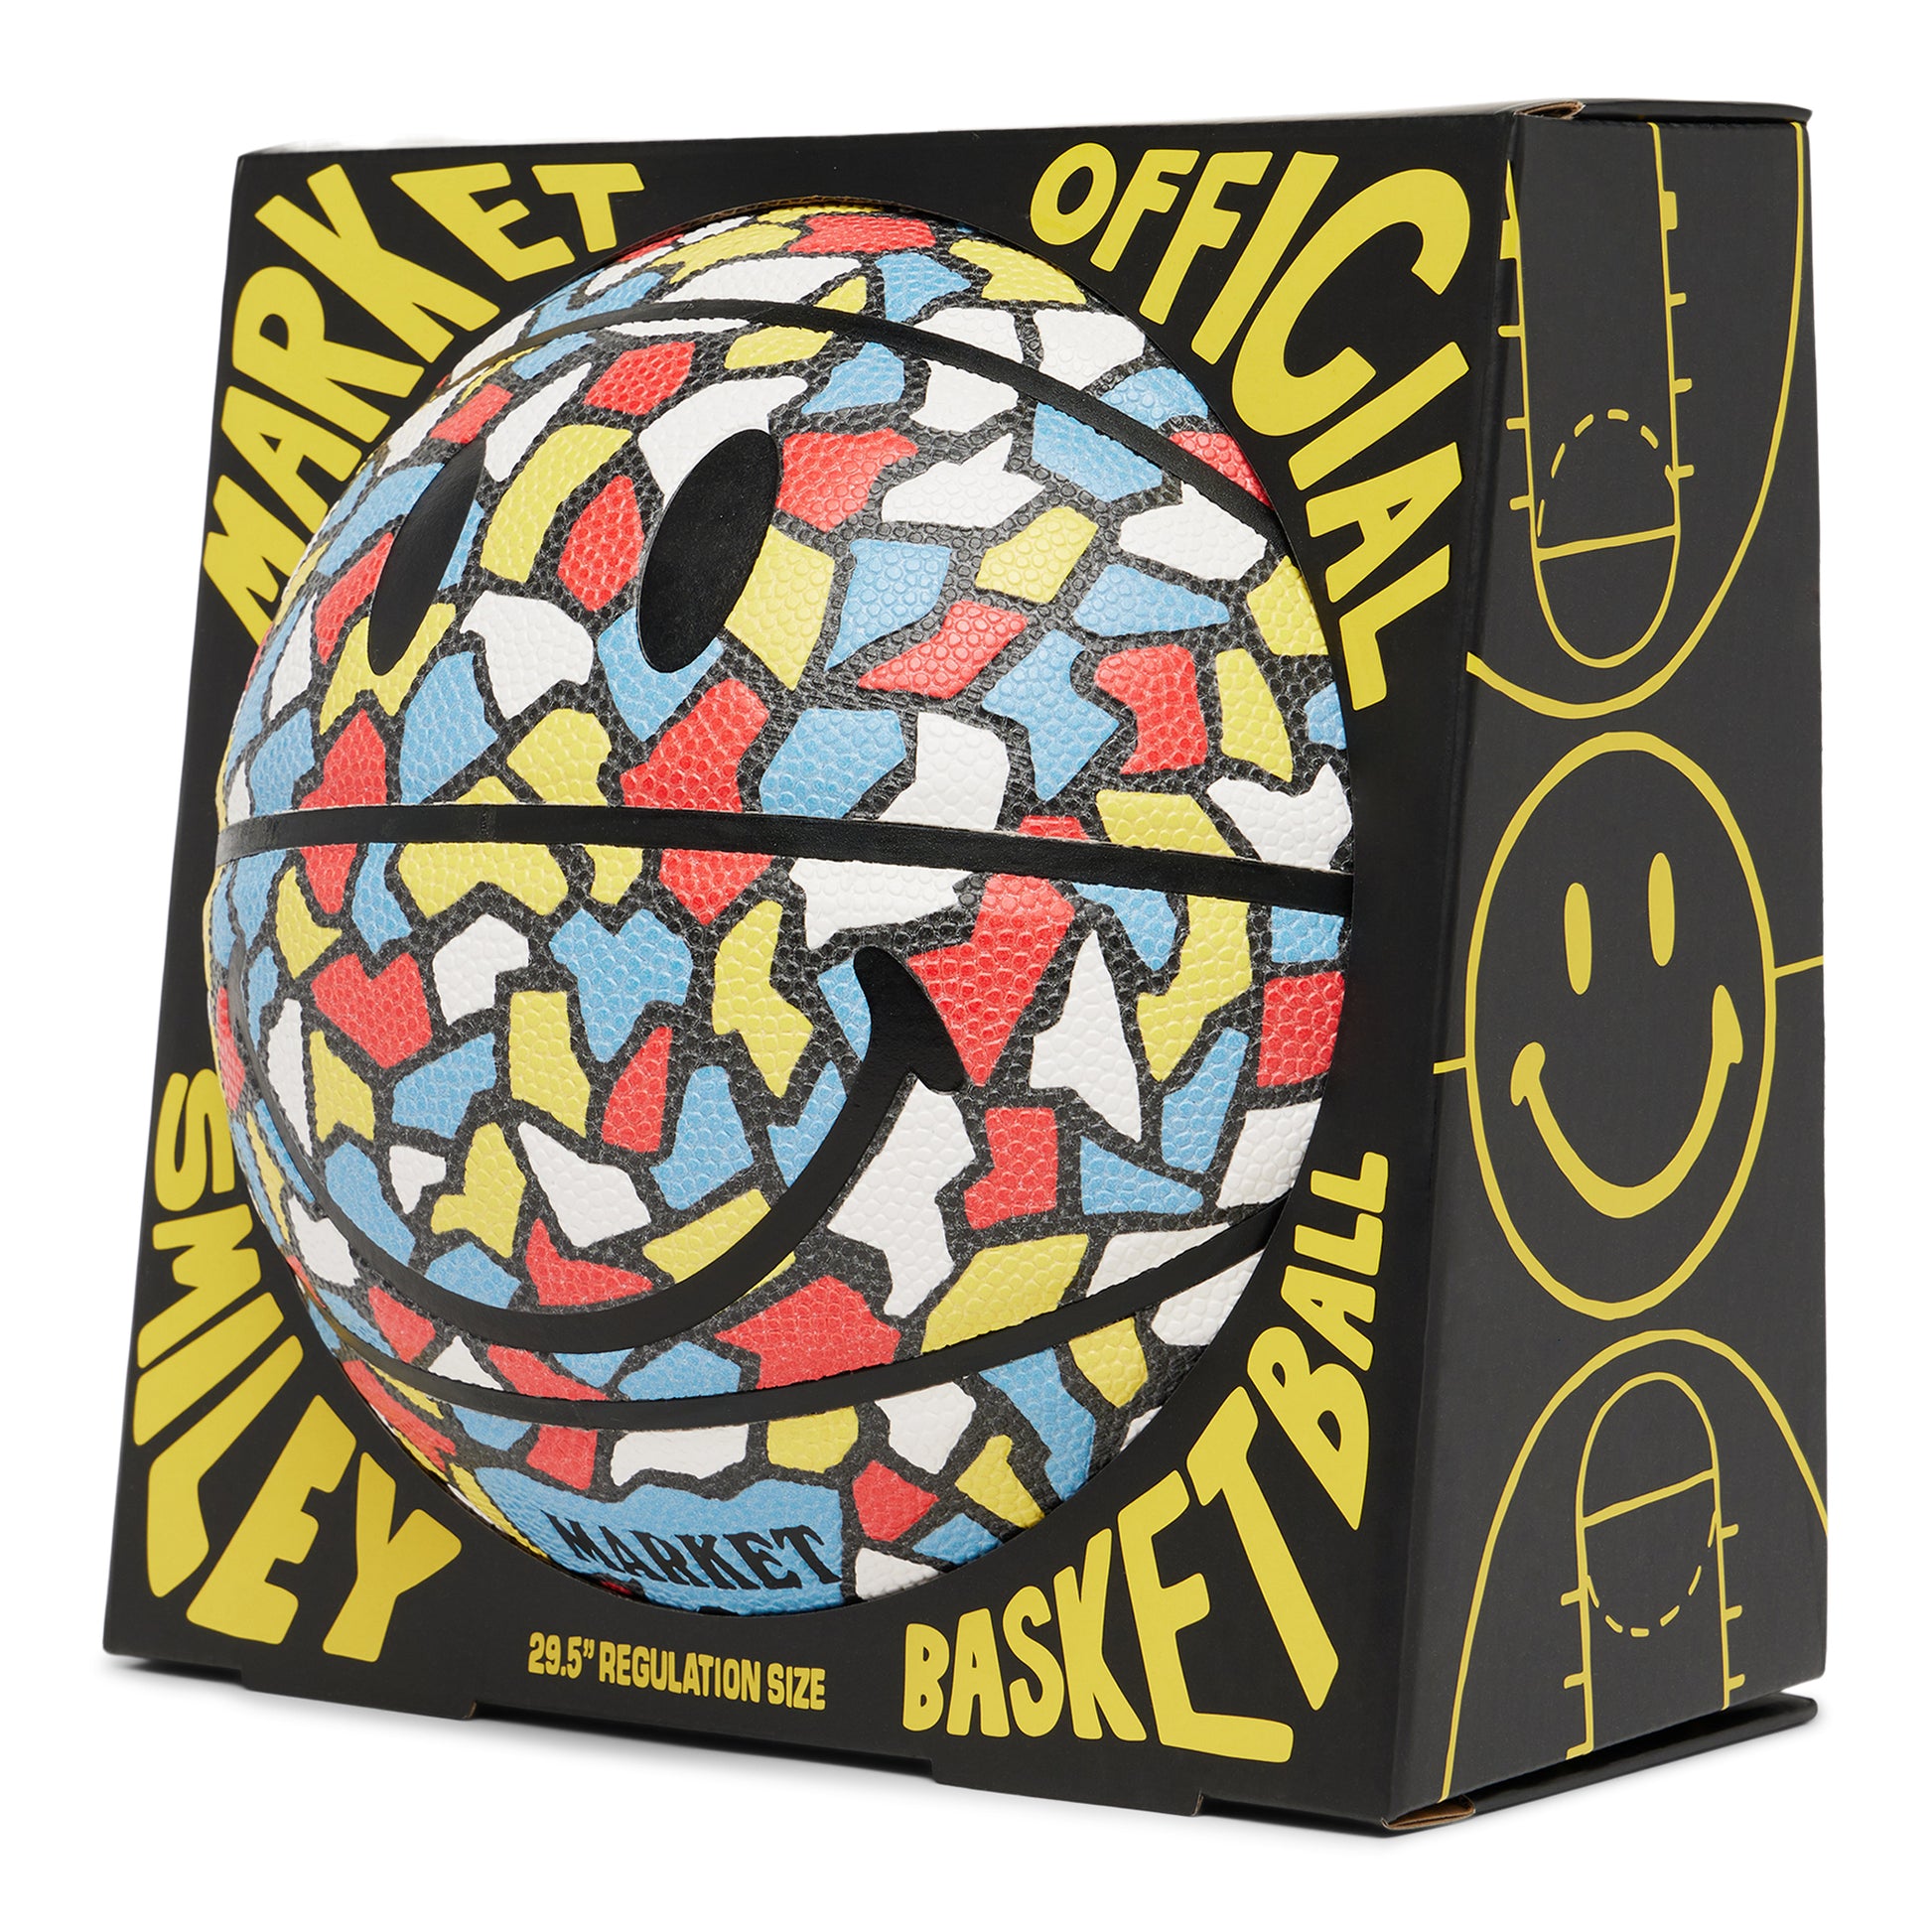 MARKET clothing brand SMILEY MARKET MOSAIC BASKETBALL. Find more basketballs, sporting goods, homegoods and graphic tees at MarketStudios.com. Formally Chinatown Market. 